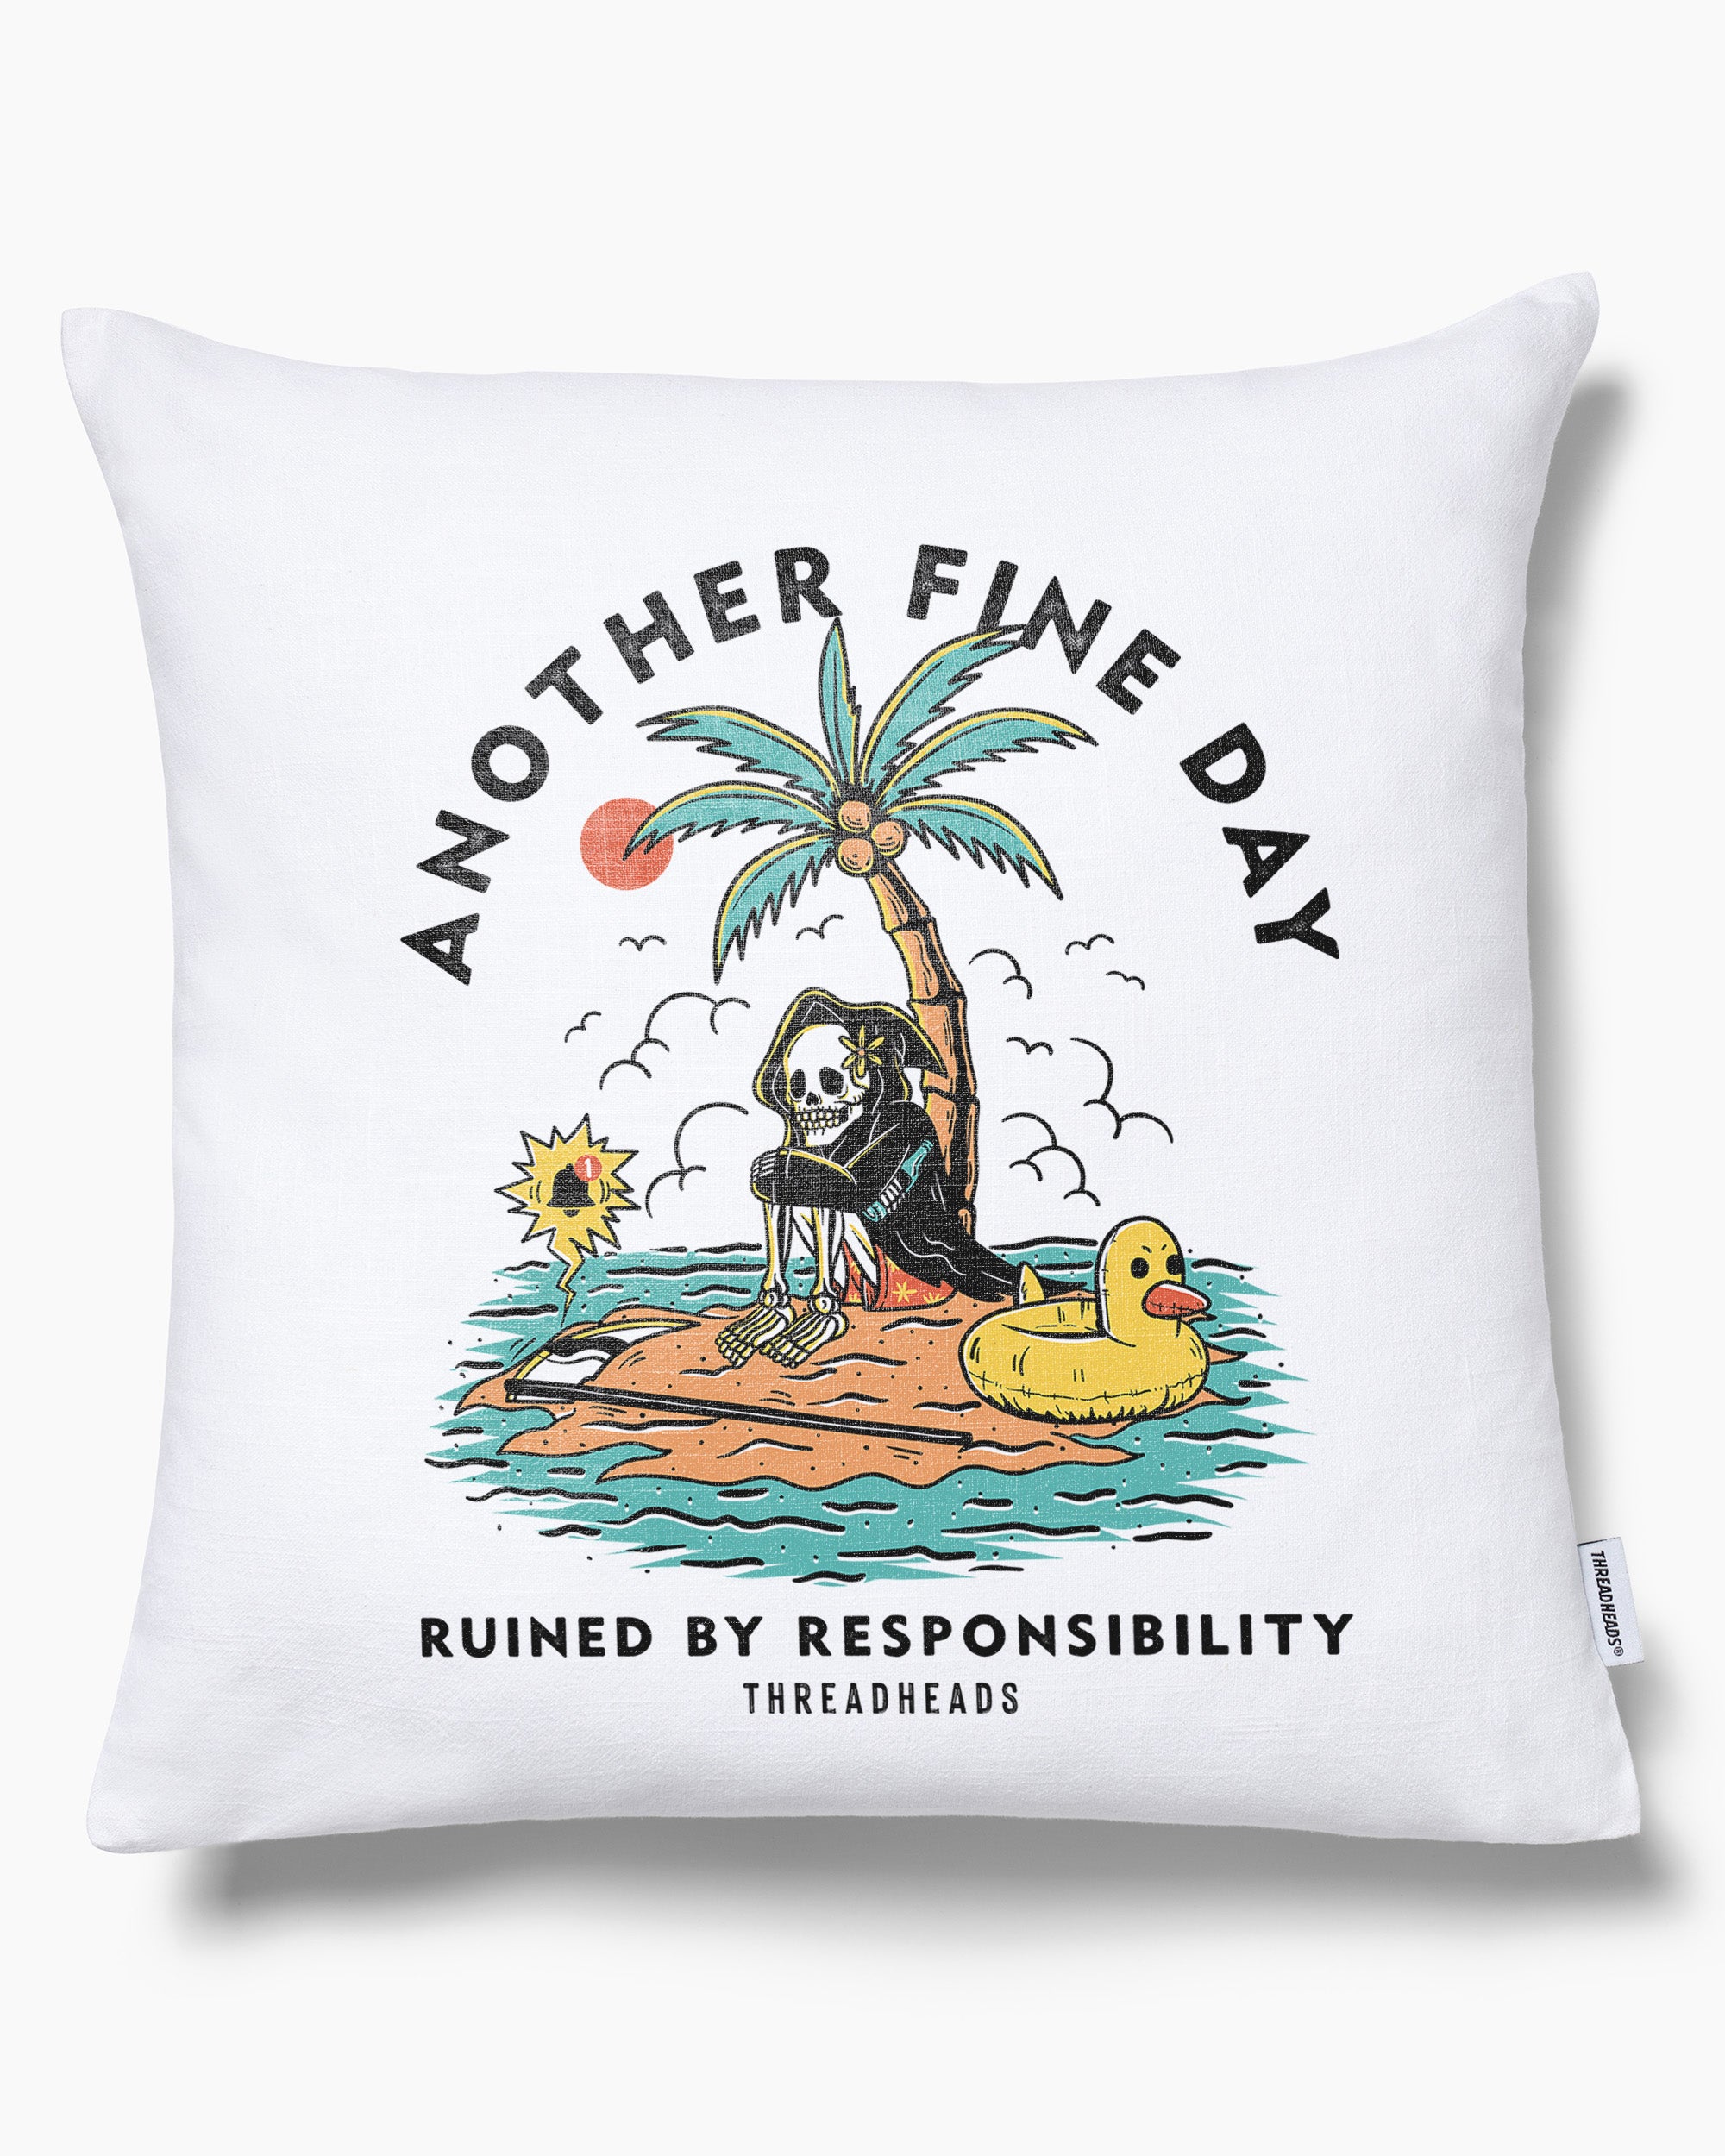 Another Fine Day Ruined by Responsibility Cushion